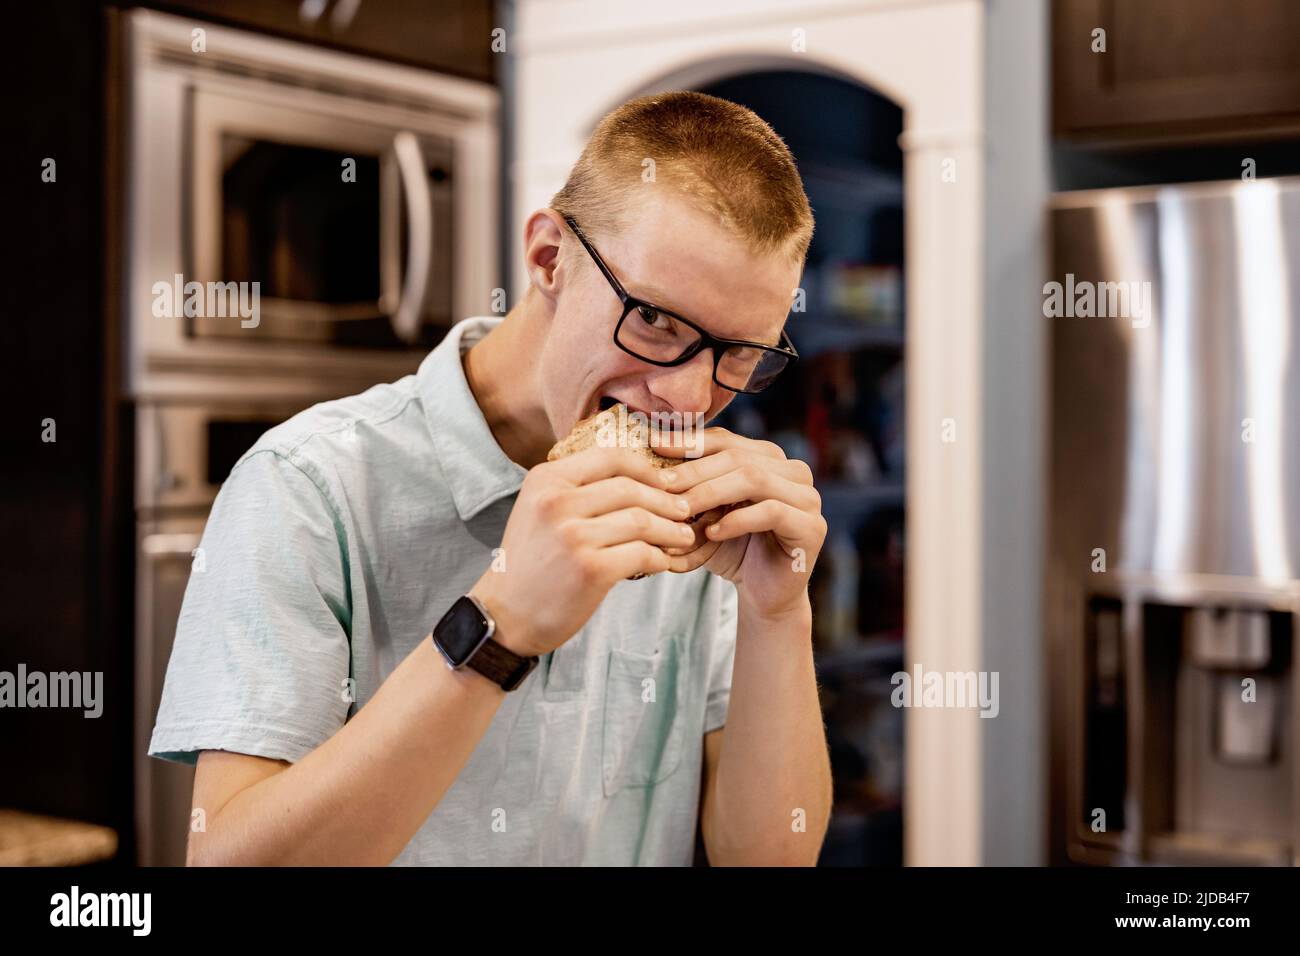 Young man standing in the kitchen at home and eating a sandwich, looking at the camera; Edmonton, Alberta, Canada Stock Photo